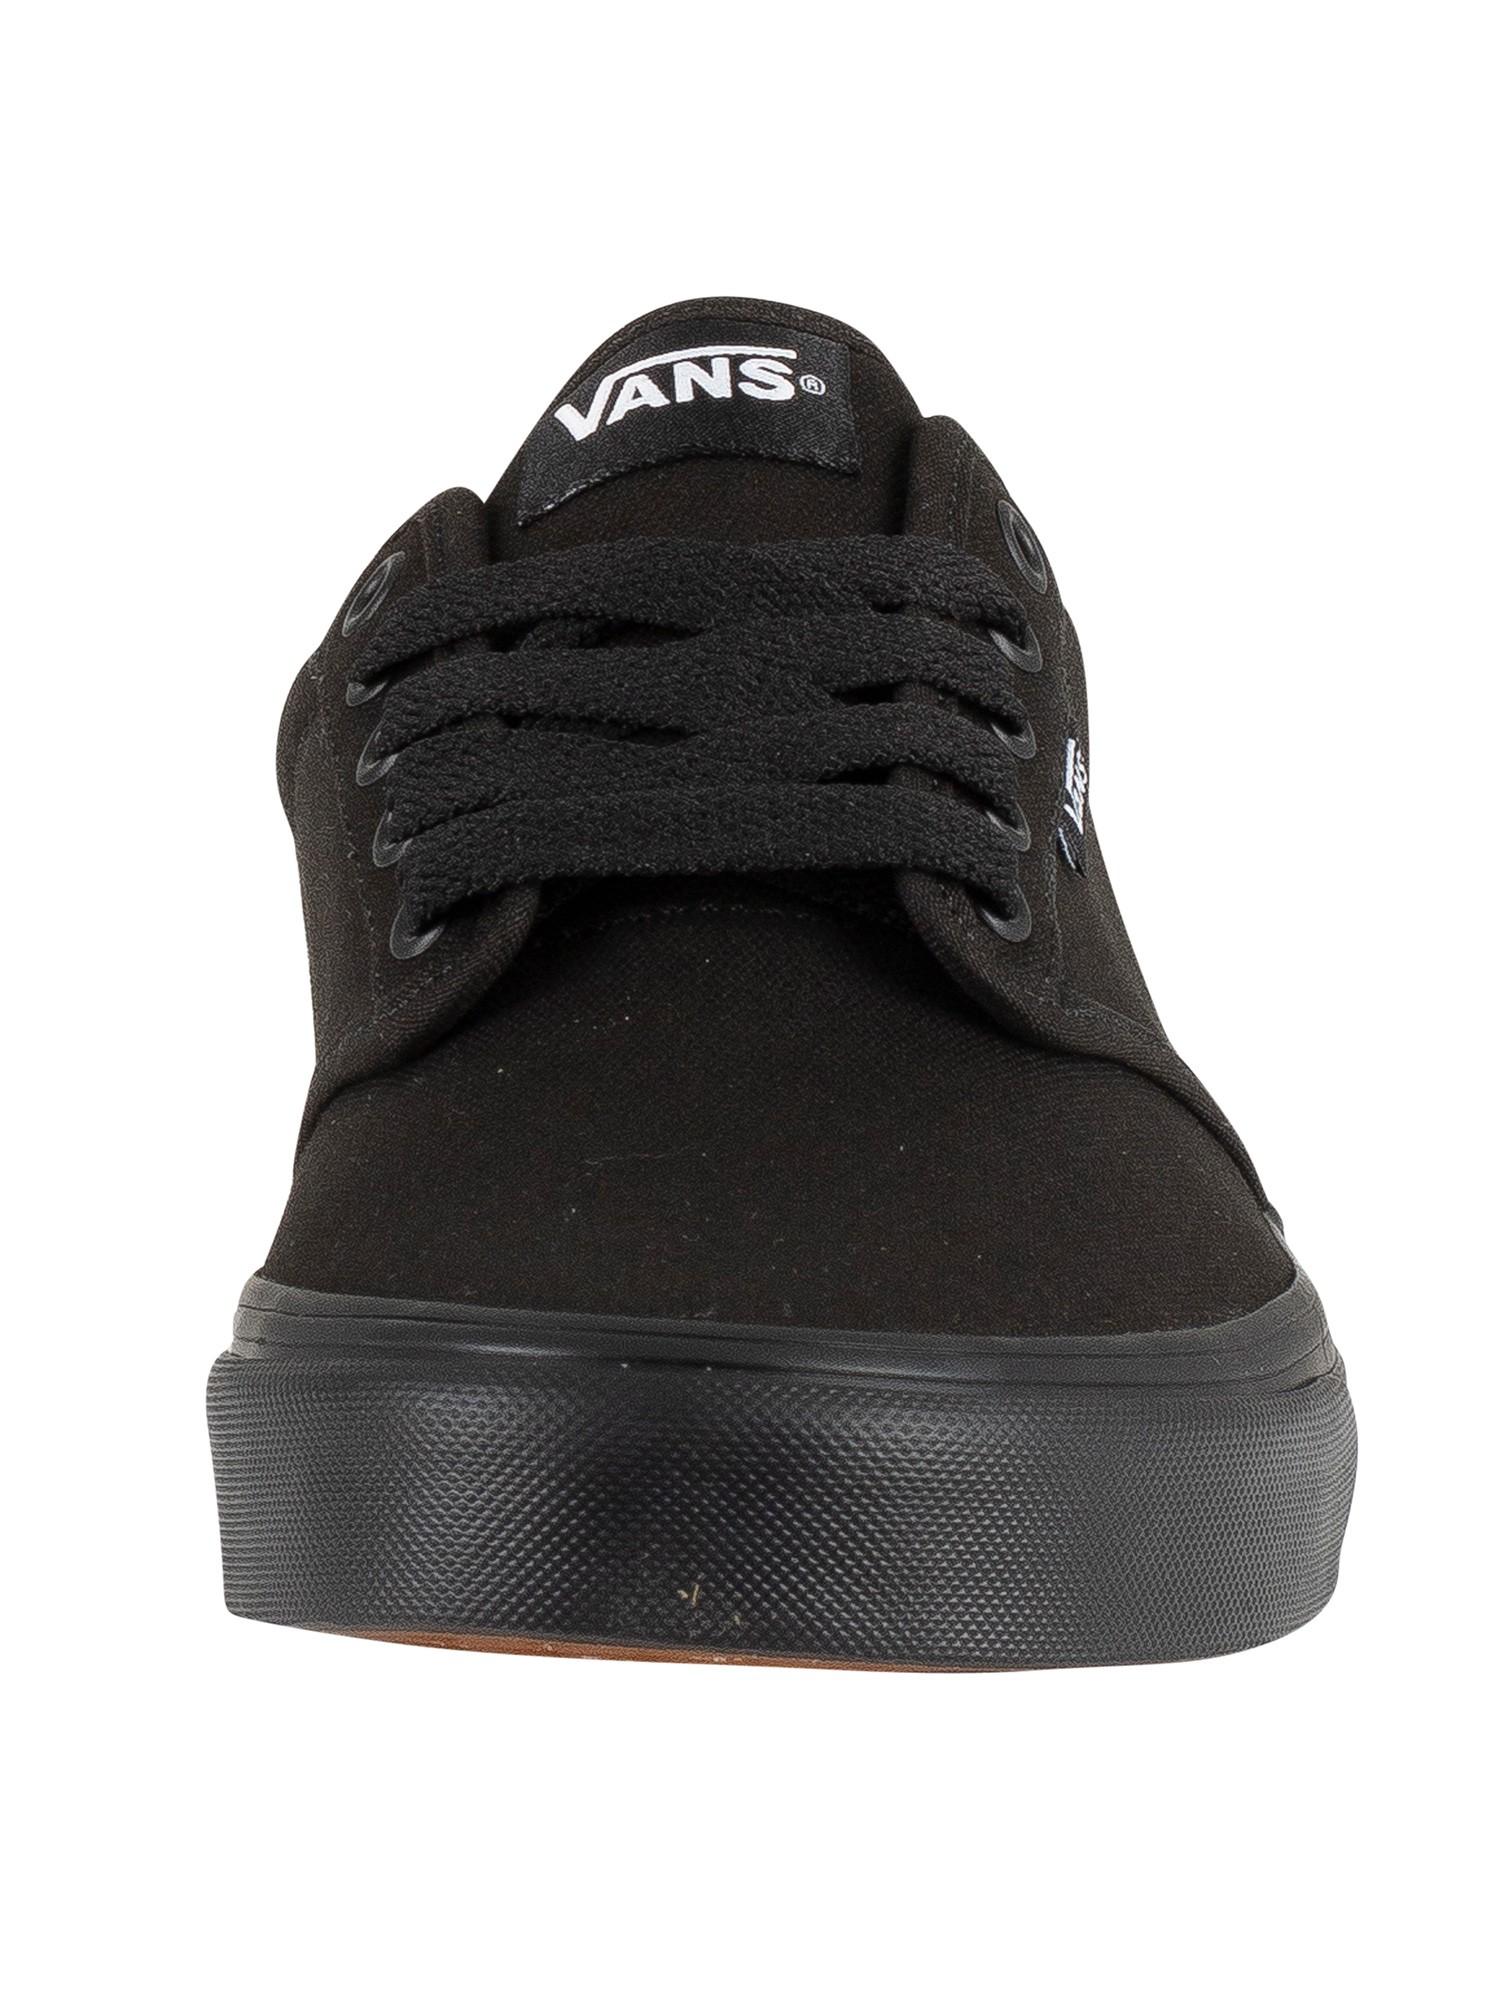 Vans Atwood Canvas Trainers in Black/Black (Black) for Men | Lyst